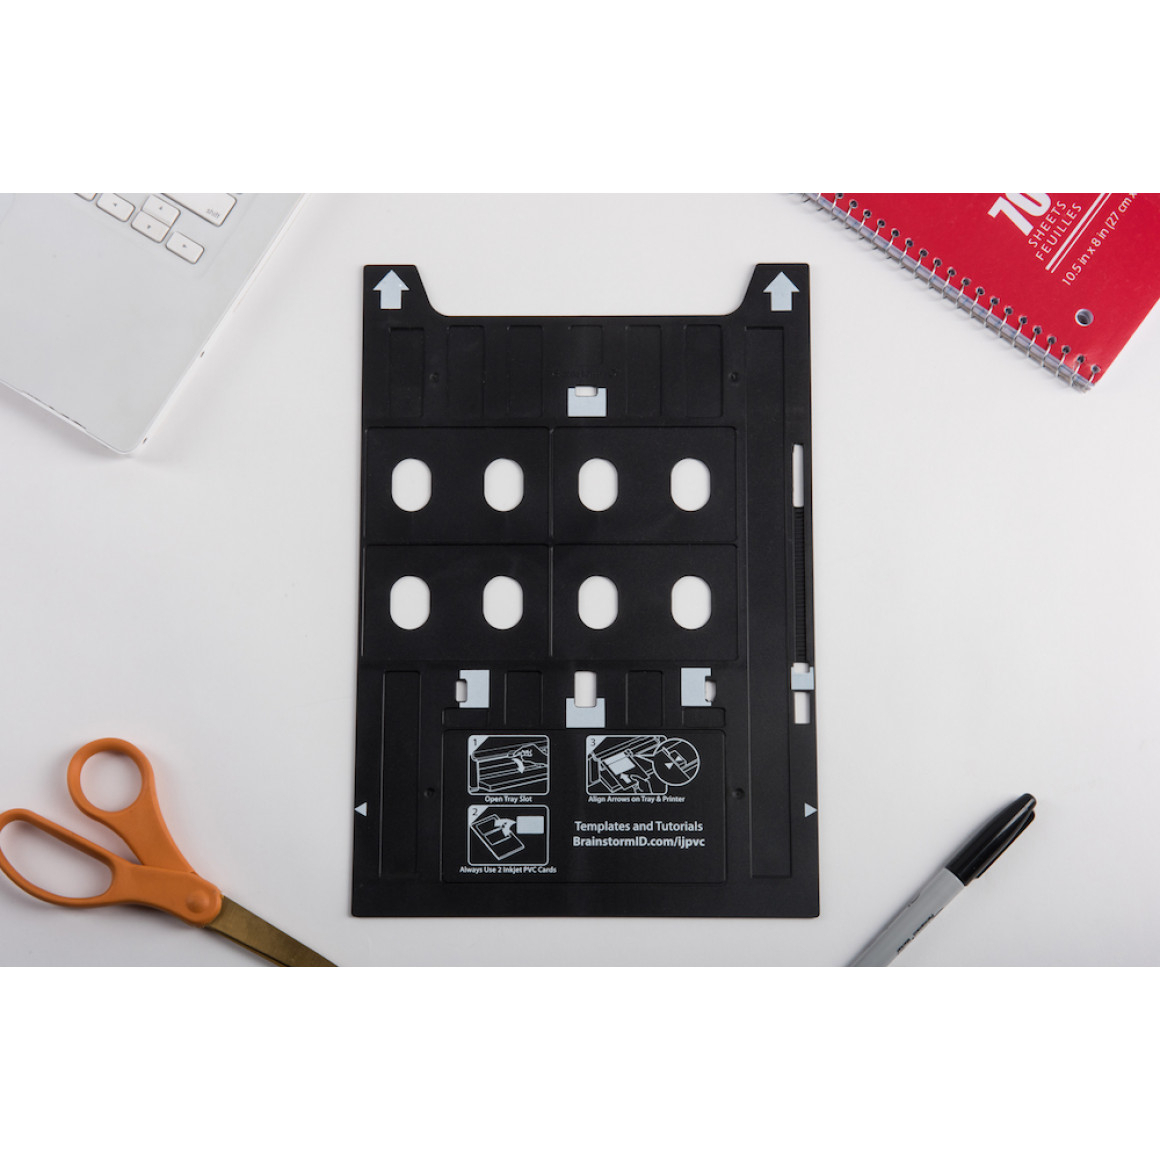 Pvc Card Tray For Epson Artisan 1430, 1430W, 1500W, R1800, And More With Regard To Pvc Card Template